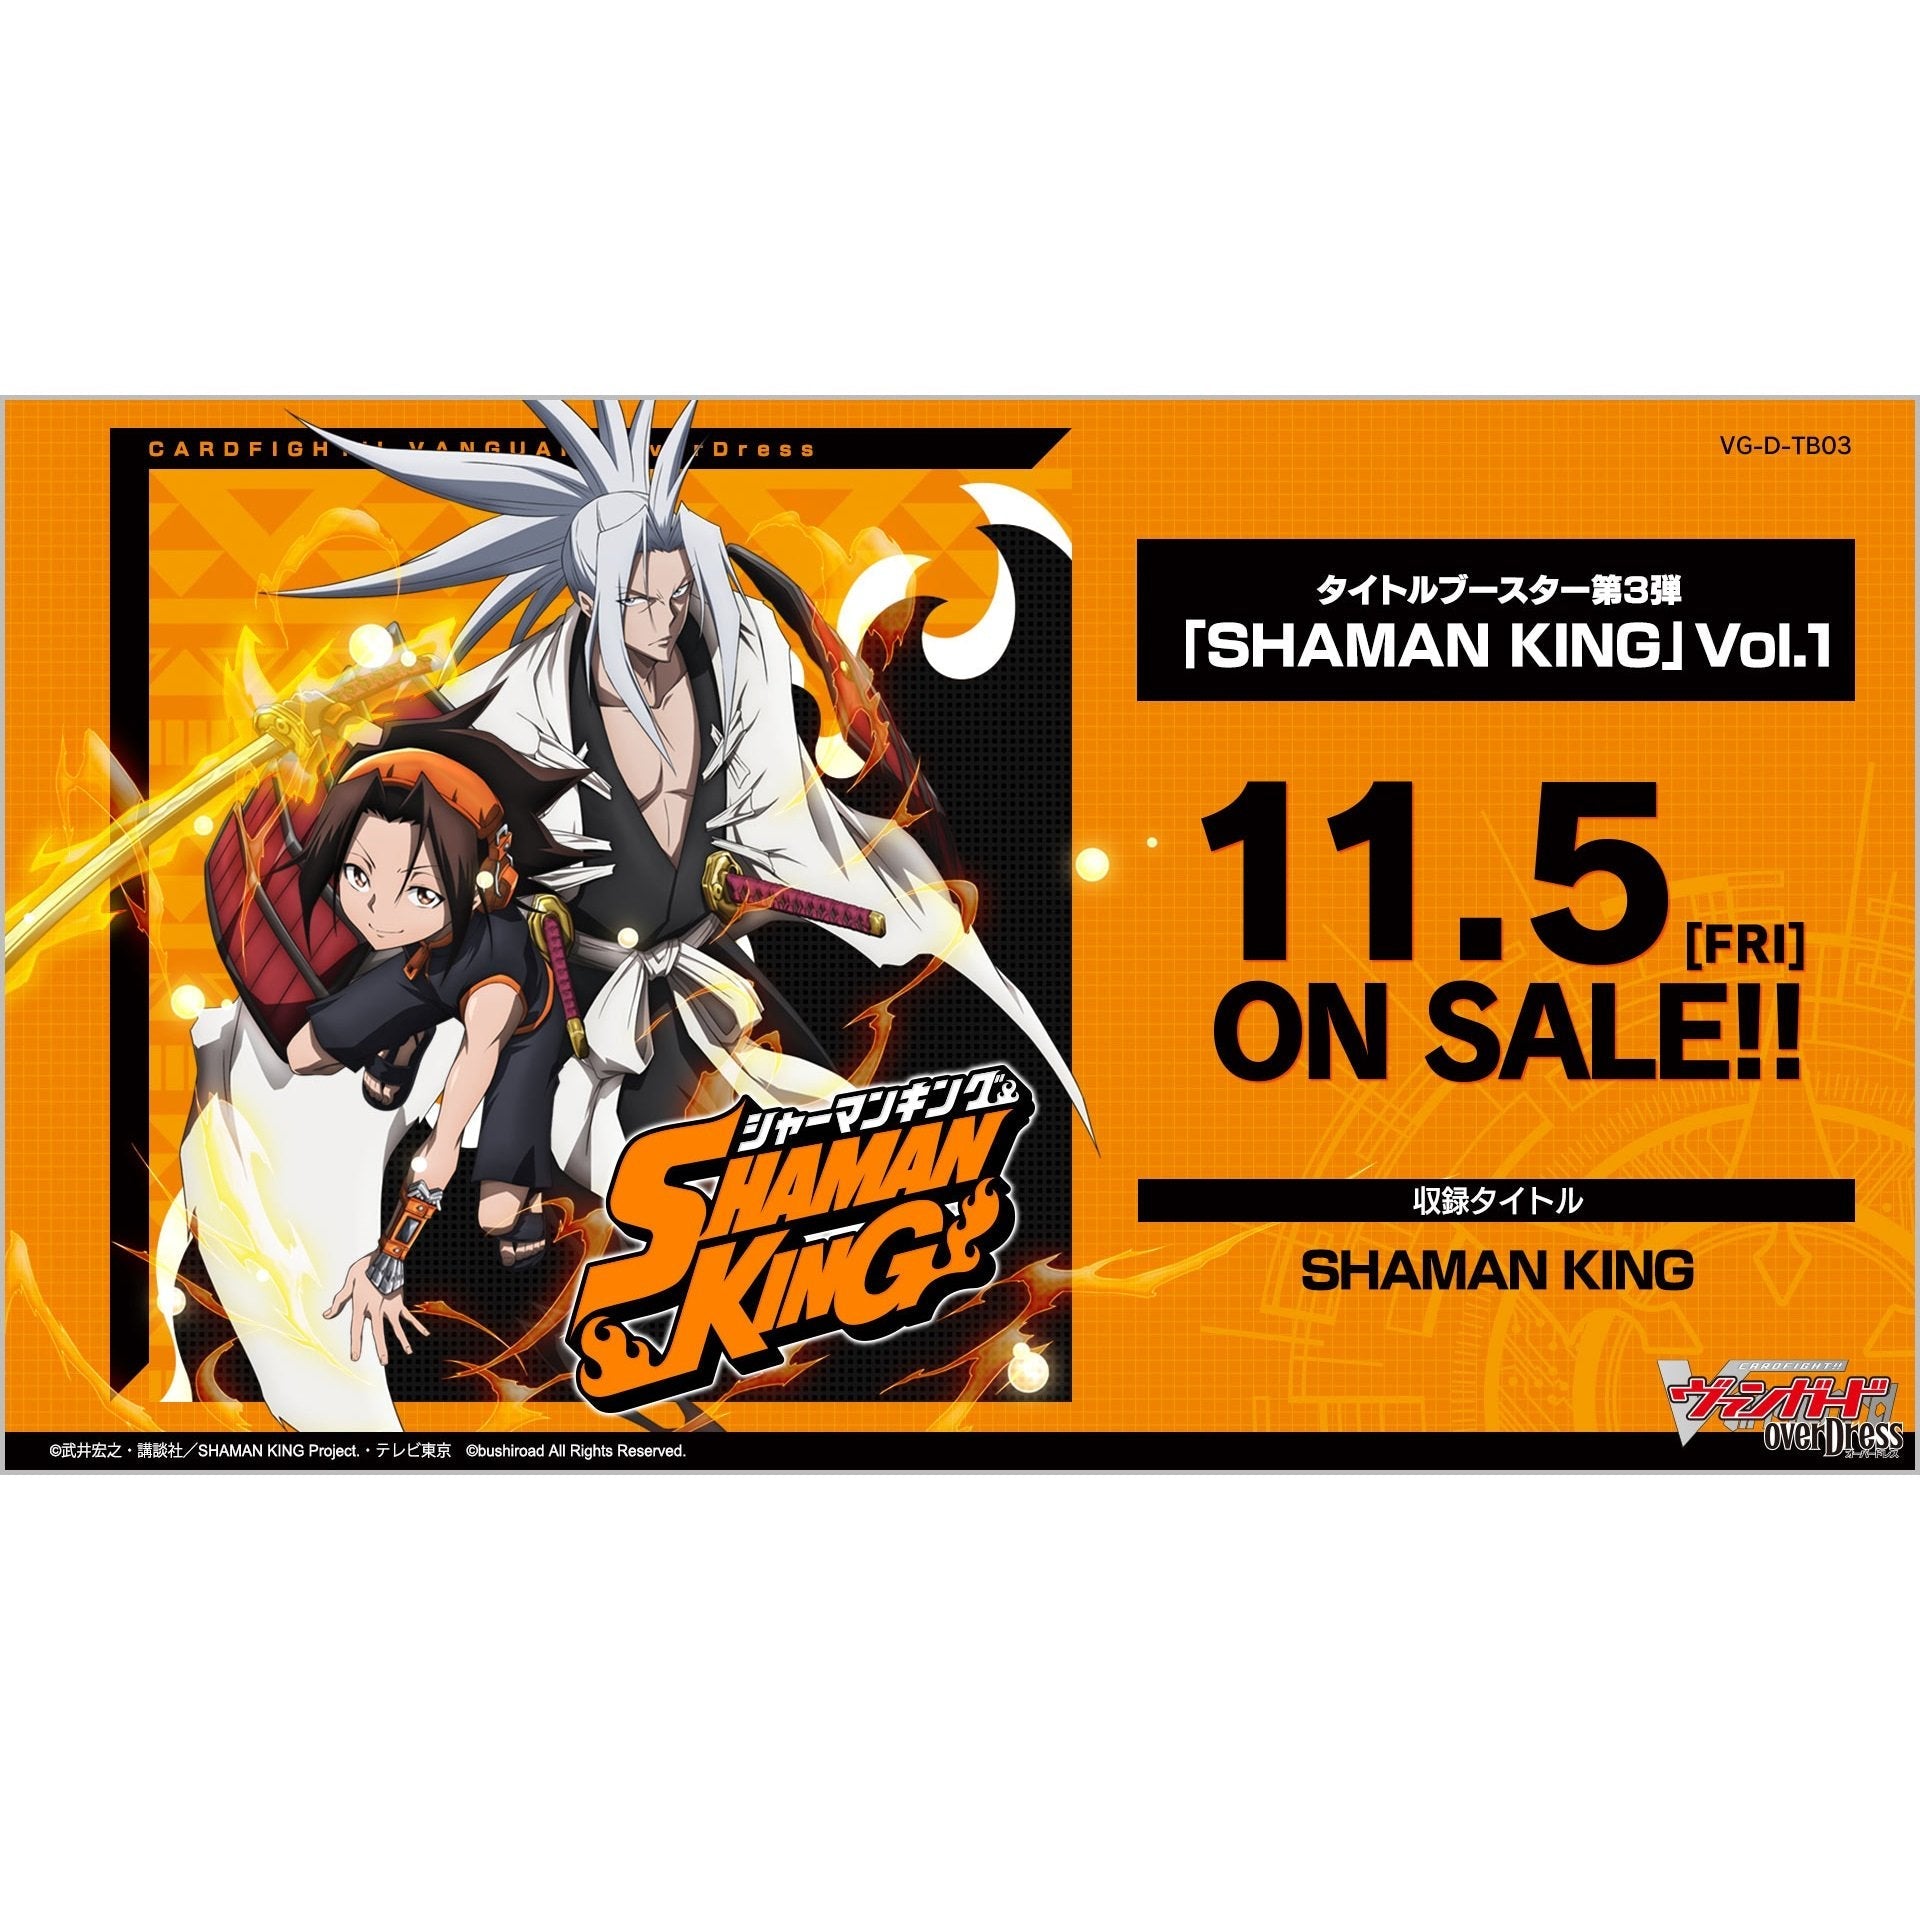 Cardfight!! Vanguard overDress Title Booster 3rd "SHAMAN KING" Vol.1 [VG-D-TB03] (Japanese)-Booster Box (12packs)-Bushiroad-Ace Cards & Collectibles